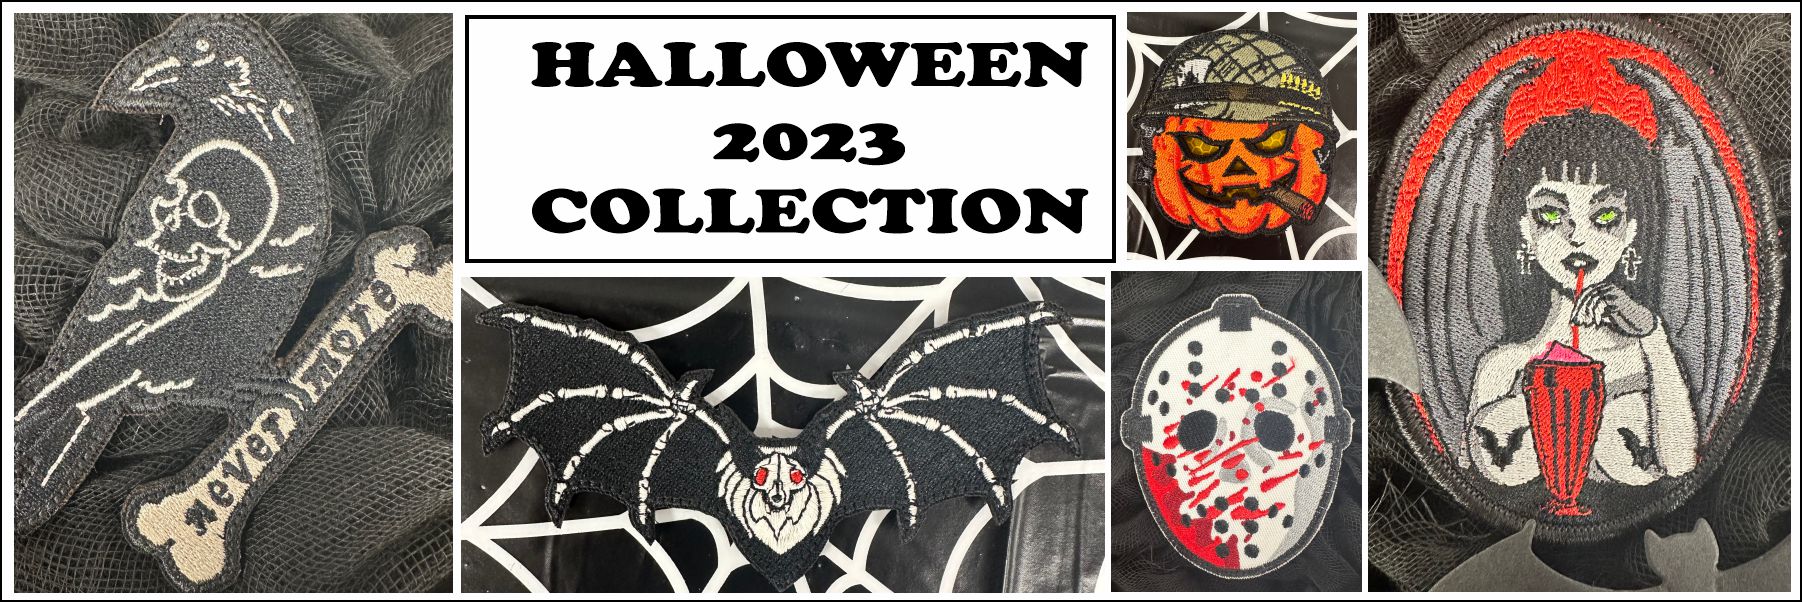 Halloween 2023 patch collection